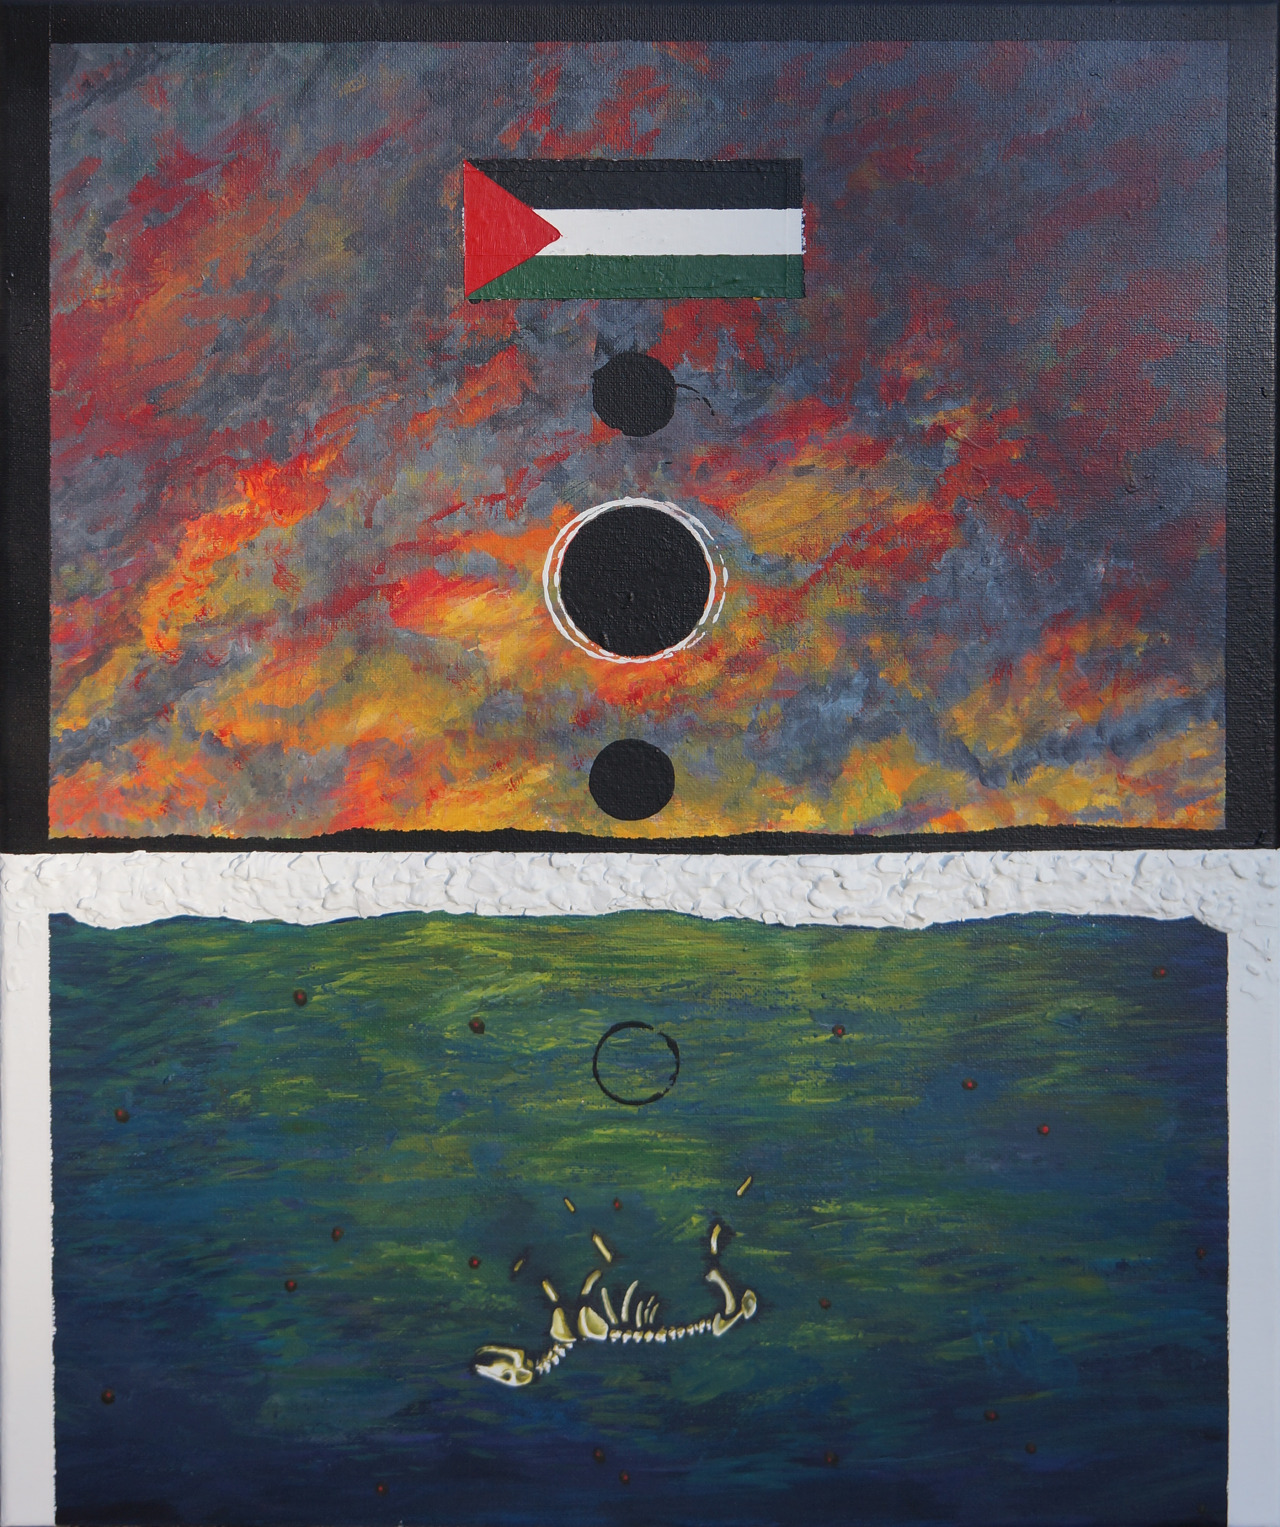 A 16"x20" acrylic painting. The top half has red and orange flames and grey smoke. The flag of Palestine is near the top, centered vertically, with 3 small, solid black spheres stacked on top of each other below it. The middle sphere is bigger than the top and bottom spheres and has a white circle around it. There is a black border around this half. The bottom half has a white border except for on the very bottom, which has no border. The horizontal white border is covered with lumpy white paint chips to look like the rubble of buildings. This separates the fire on top with a blue and green ocean on the bottom. Floating in the middle of the ocean is an animal skeleton, surrounded by olives. There is a hollow black circle above the skeleton, continuing the path of the 3 spheres from the top half.